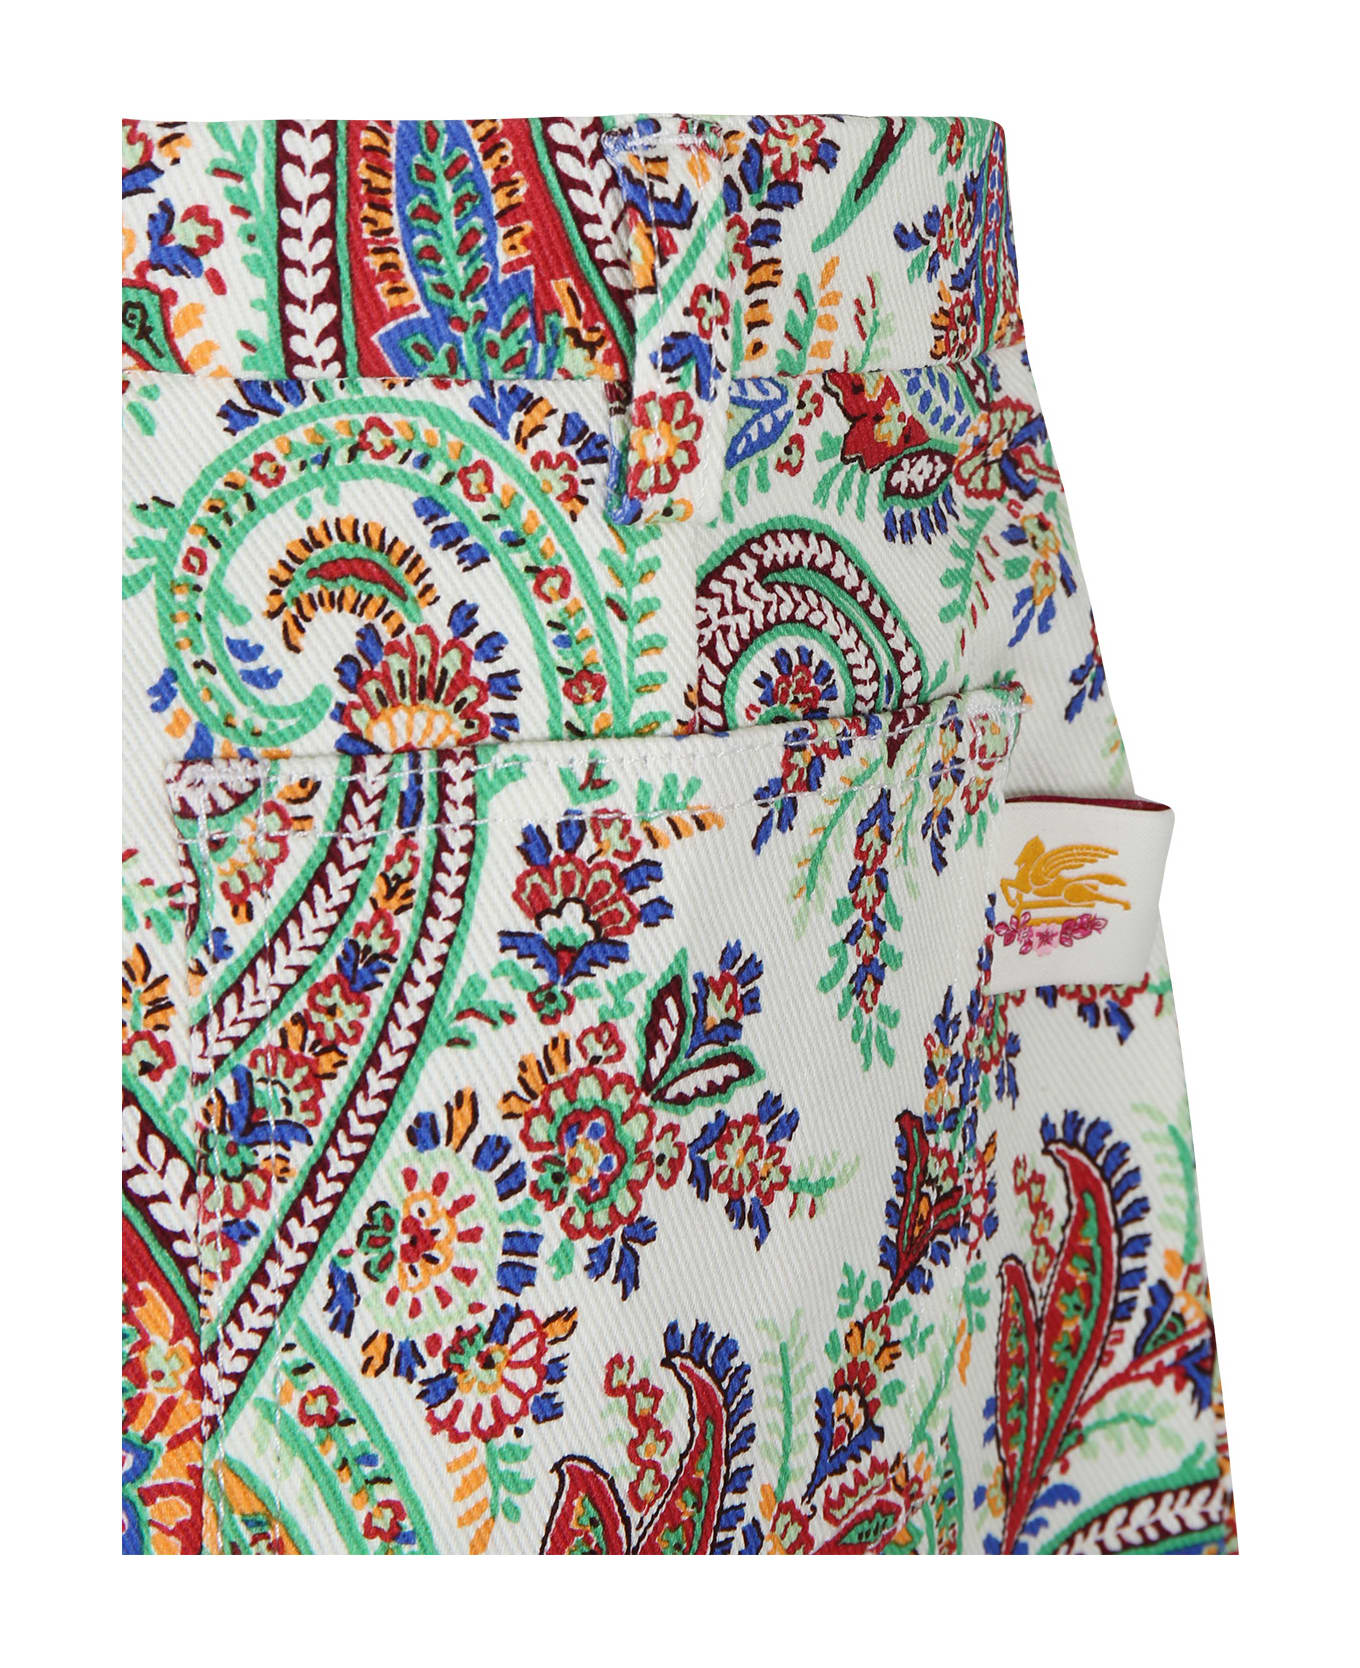 Etro Ivory Shorts For Girl With Paisley Pattern - ivory/colourful ボトムス